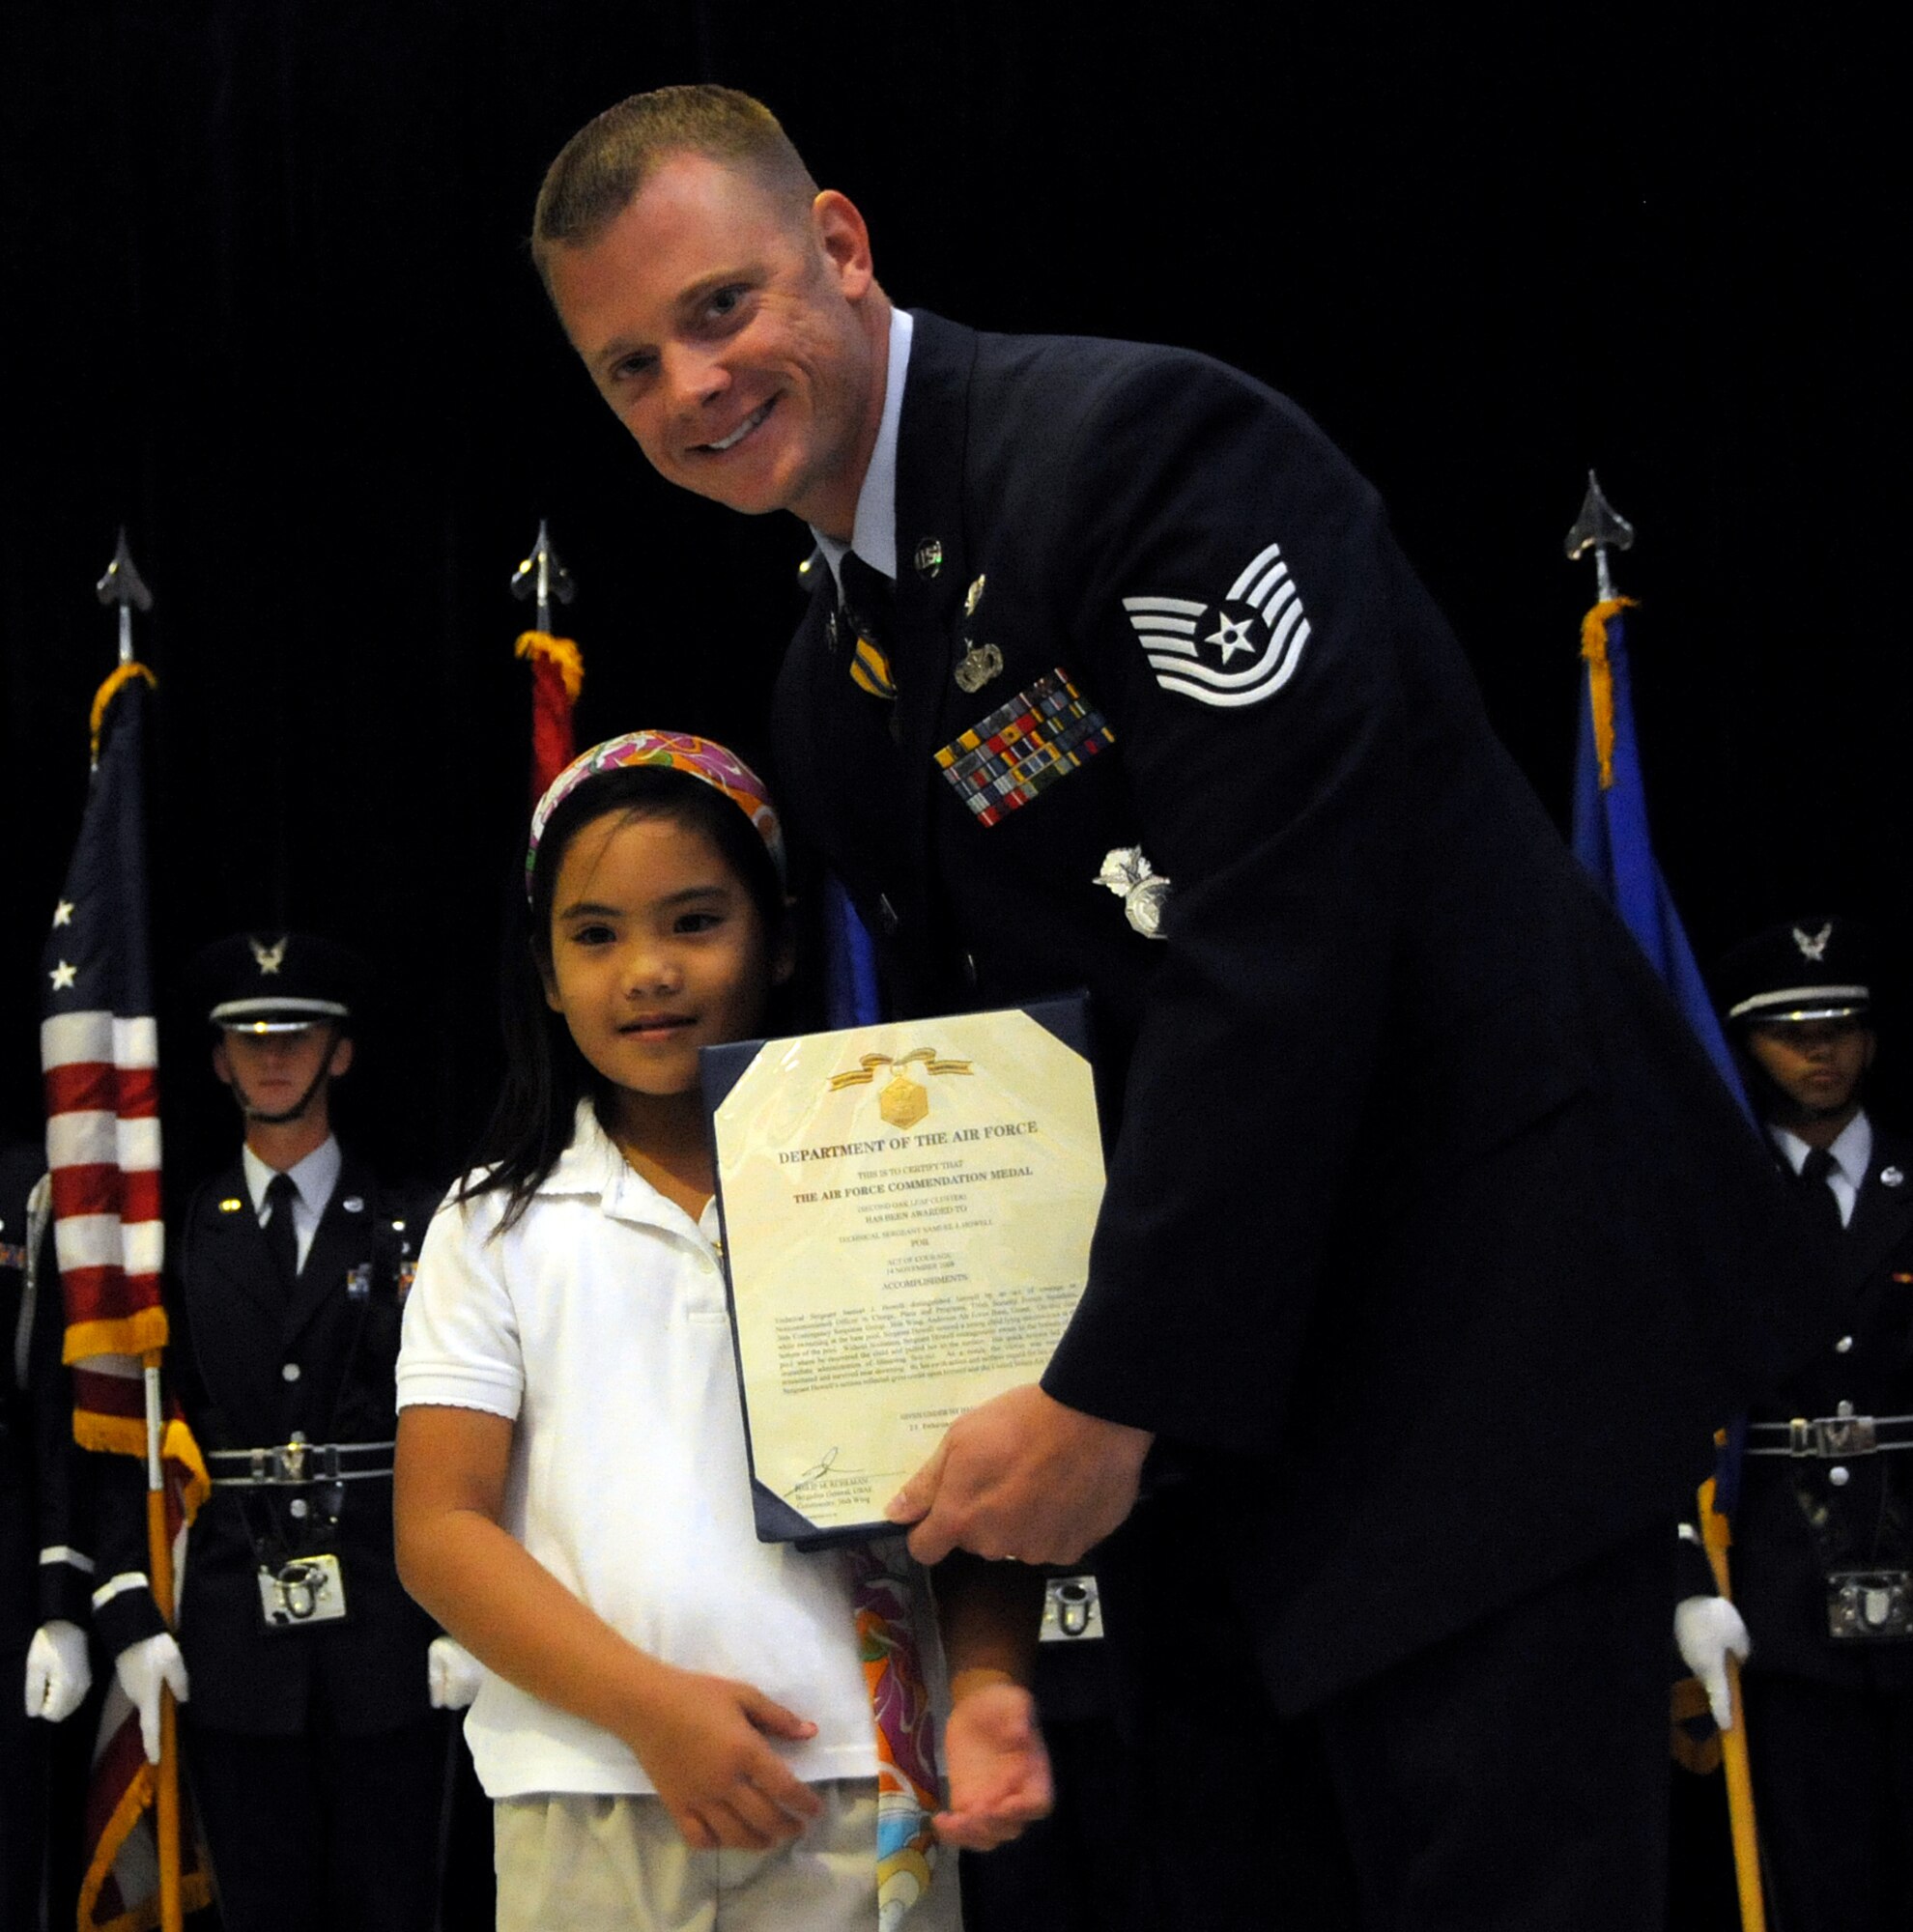 ANDERSEN AIR FORCE BASE, Guam - Jaeleen Jaylo presents Tech. Sgt. Sam Howell, 36th Security Forces Squadron, the Commodation for his heroic efforts during the Andersen Elementary School Awards Ceremony here March 4. The Air Force Commendation Medal may be awarded to members of the Armed Forces of the United States below the grade of Brigadier General who, while serving in any capacity with the Air Force, distinguish themselves by heroism, outstanding achievement, or by meritorious service not of a sufficient nature to justify a higher award. (U.S. Air Force photo by Airman 1st Class Courtney Witt)
